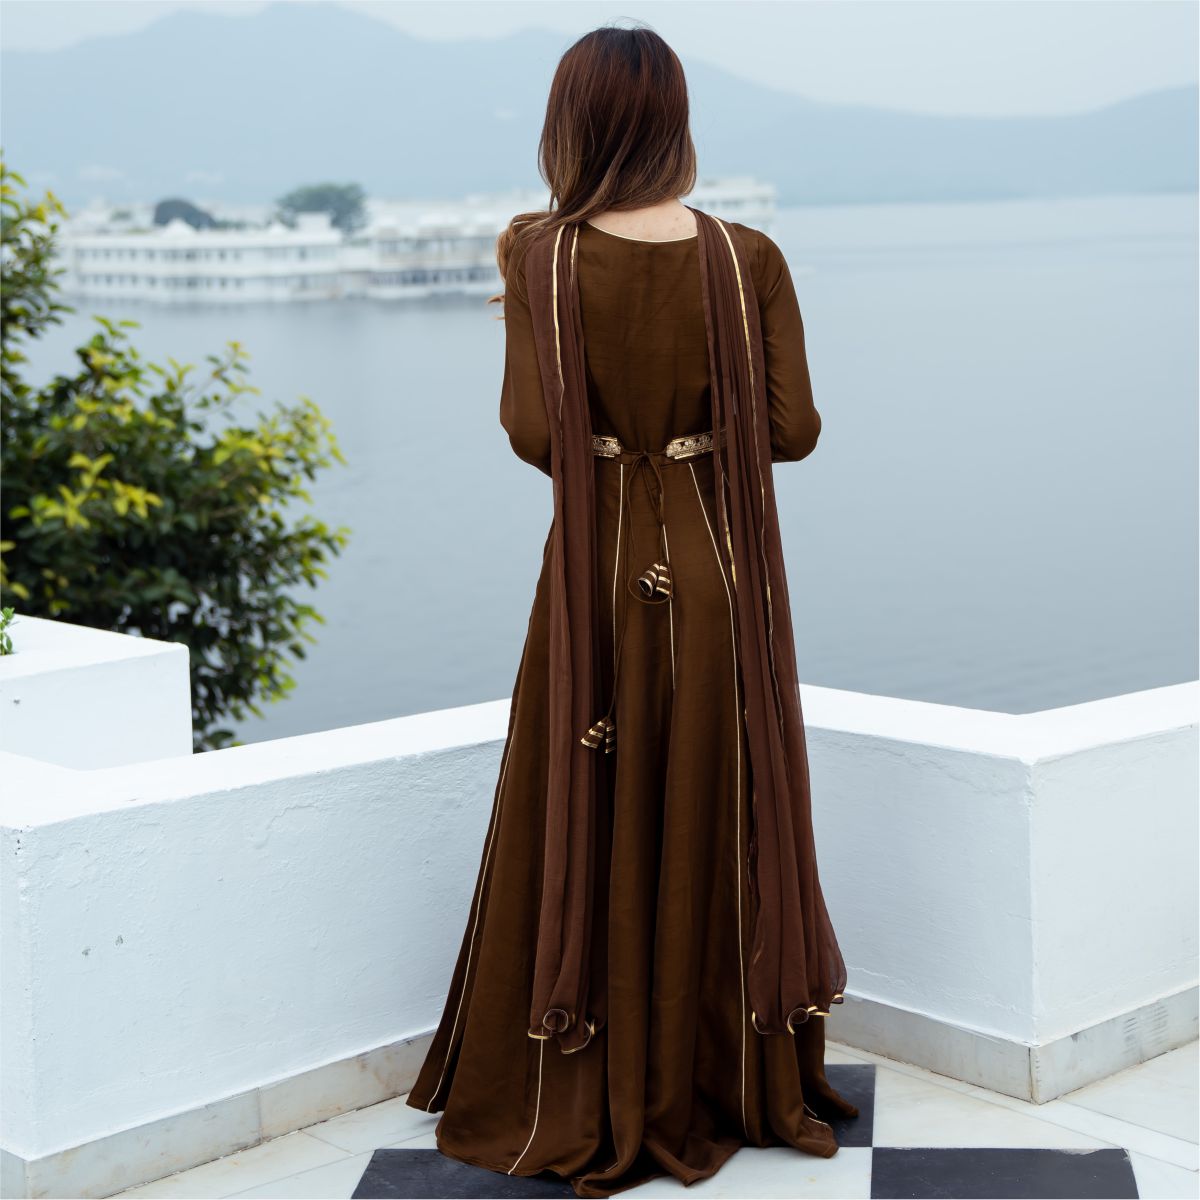 Chic / Beautiful Brown Evening Dresses 2020 A-Line / Princess  Off-The-Shoulder Short Sleeve Beading Glitter Polyester Rhinestone Sash  Floor-Length / Long Backless Formal Dresses